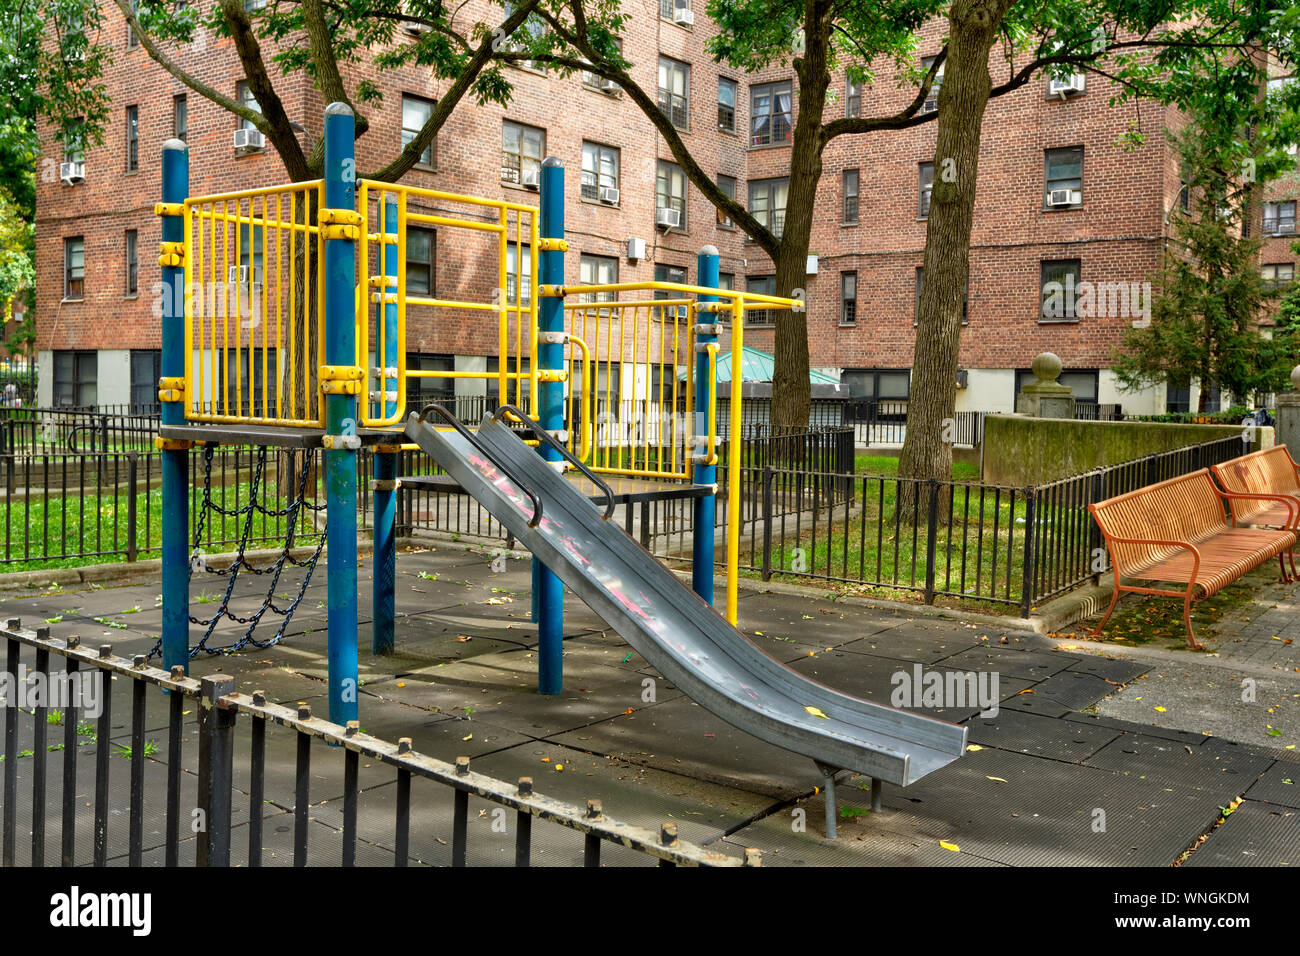 Playground within housing project in America Stock Photo